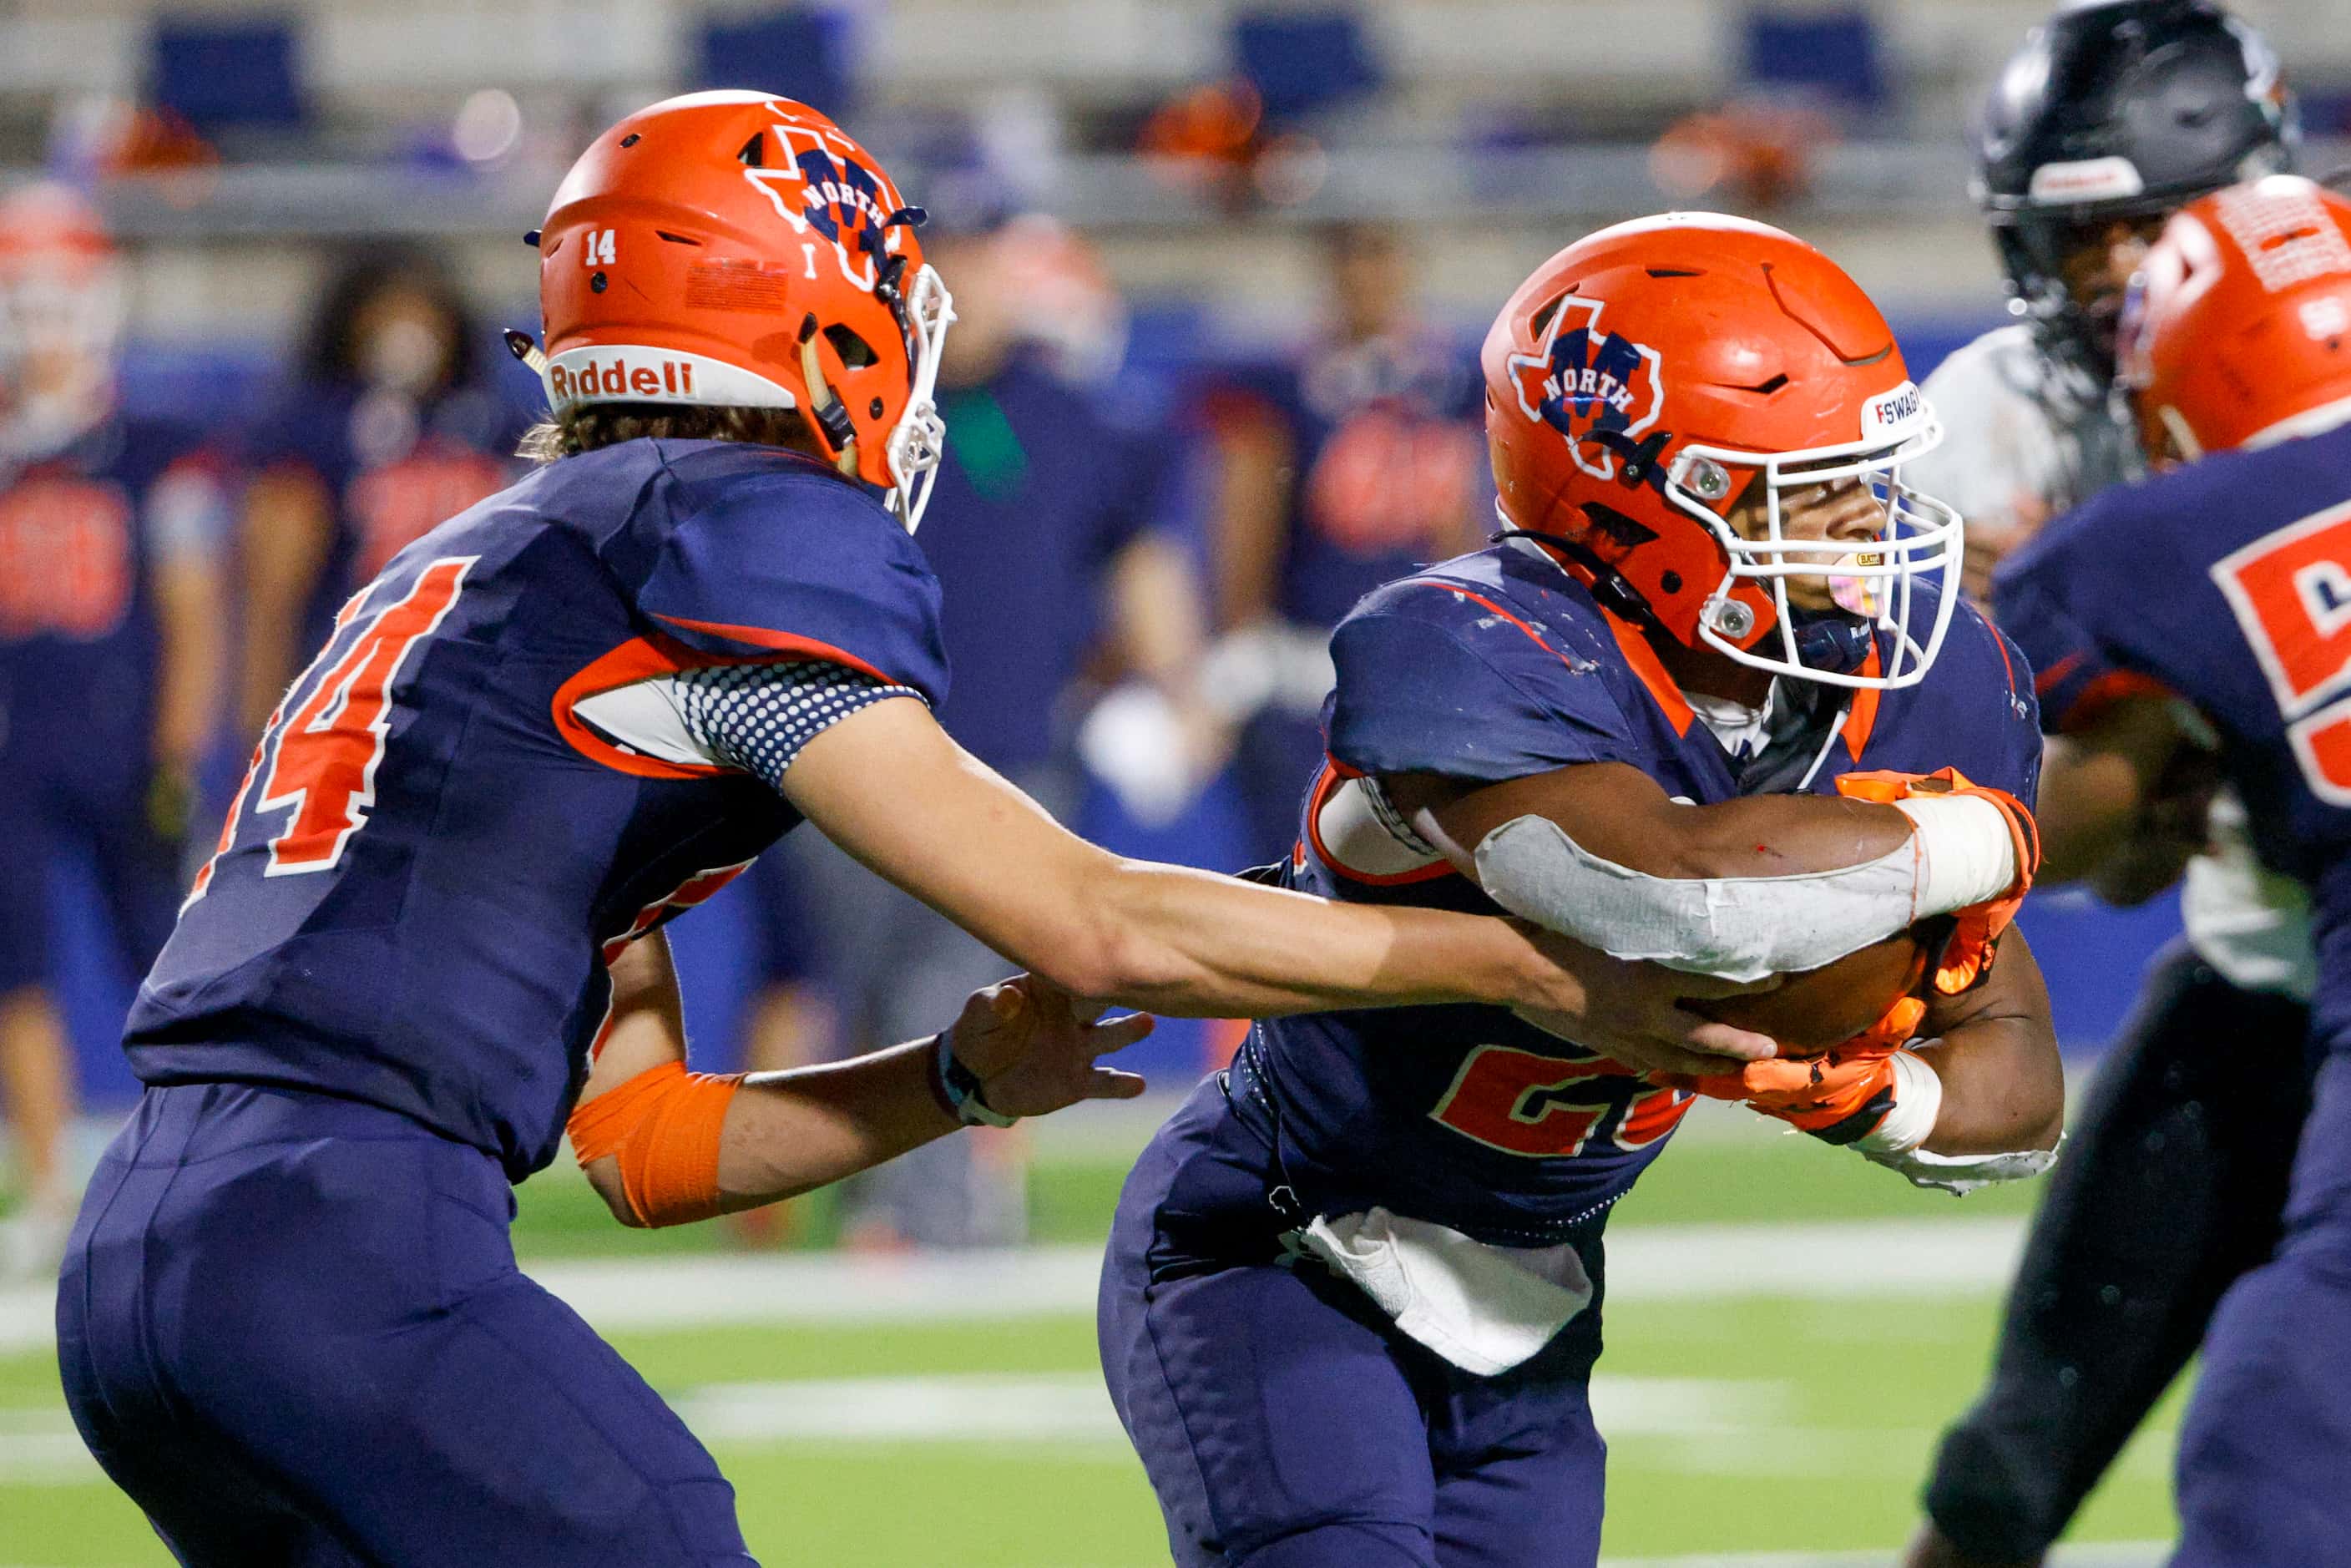 McKinney North quarterback Colin Hitchcock (14) hands off to running back Jadan Smith during...